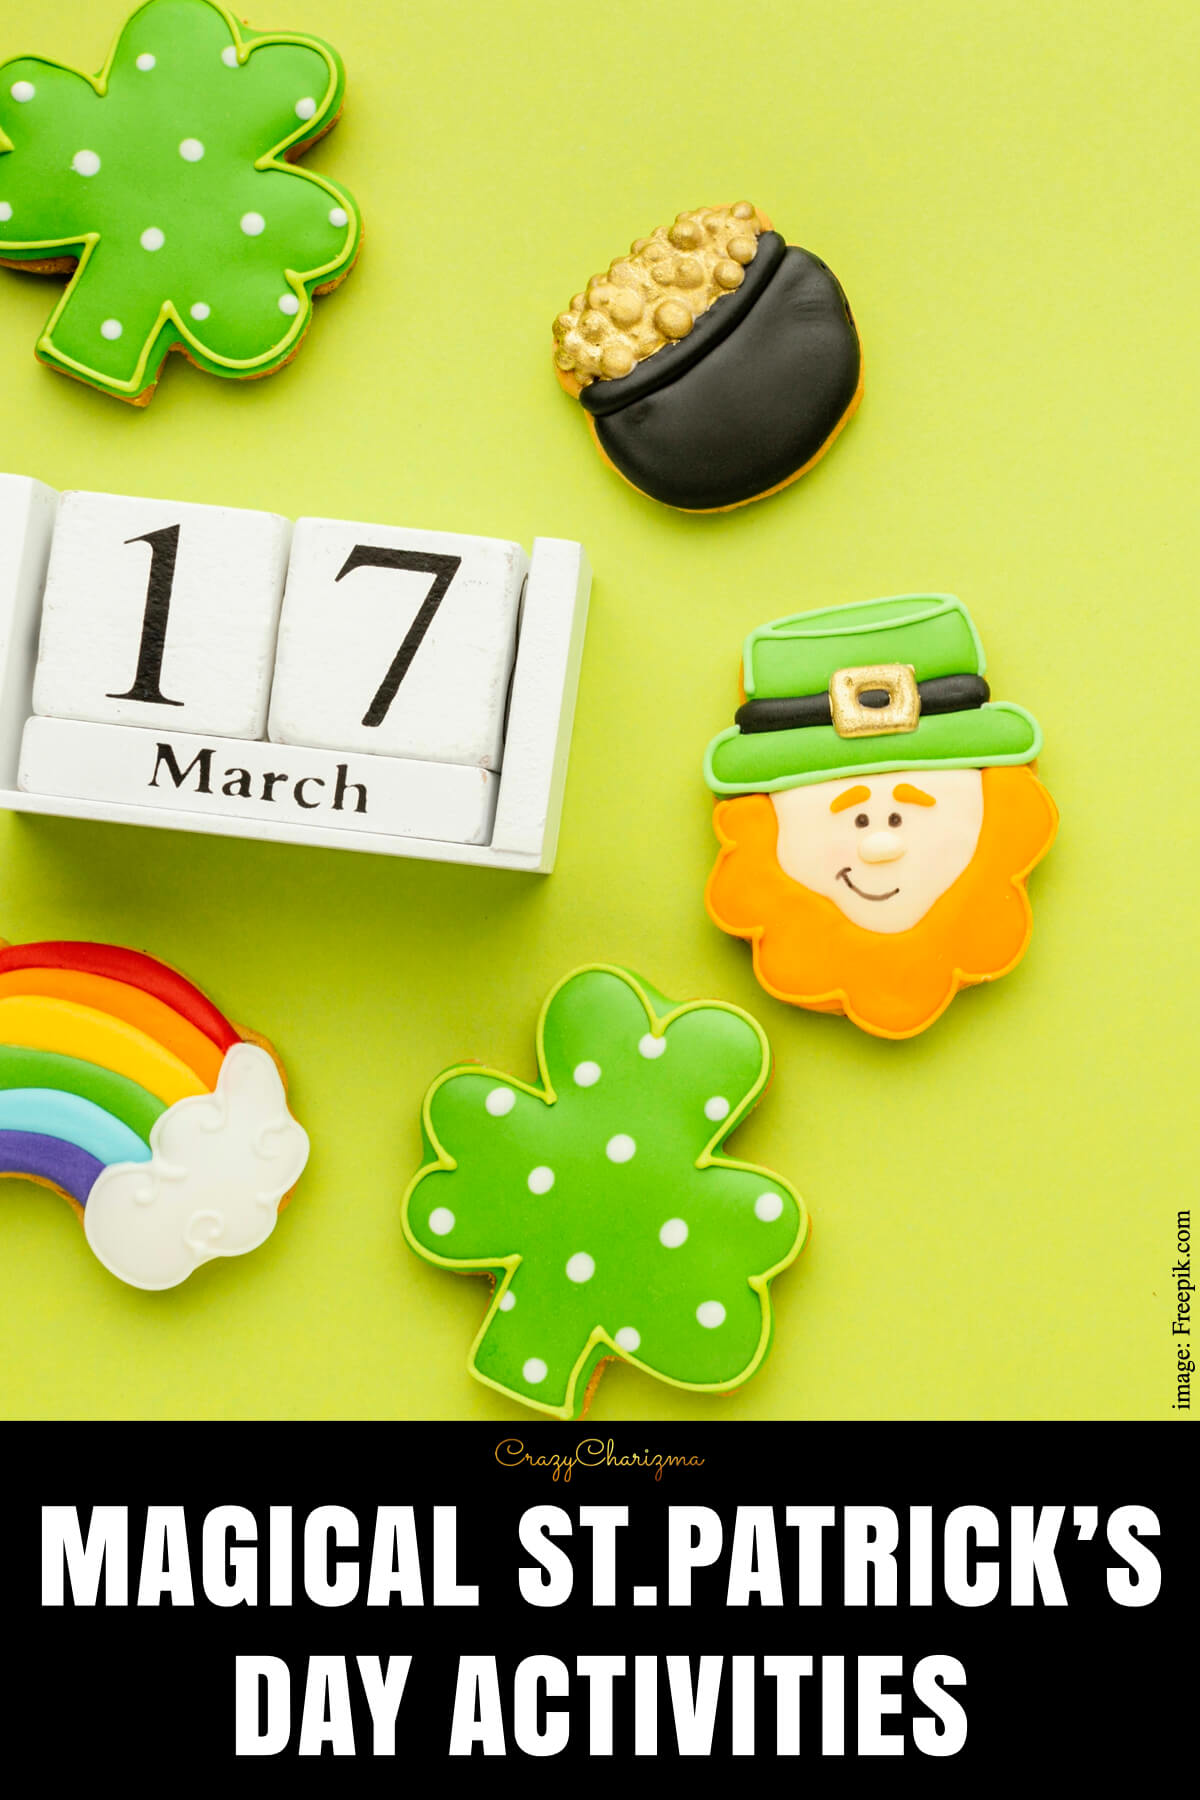 Magical St. Patrick's Day Activities for Kids